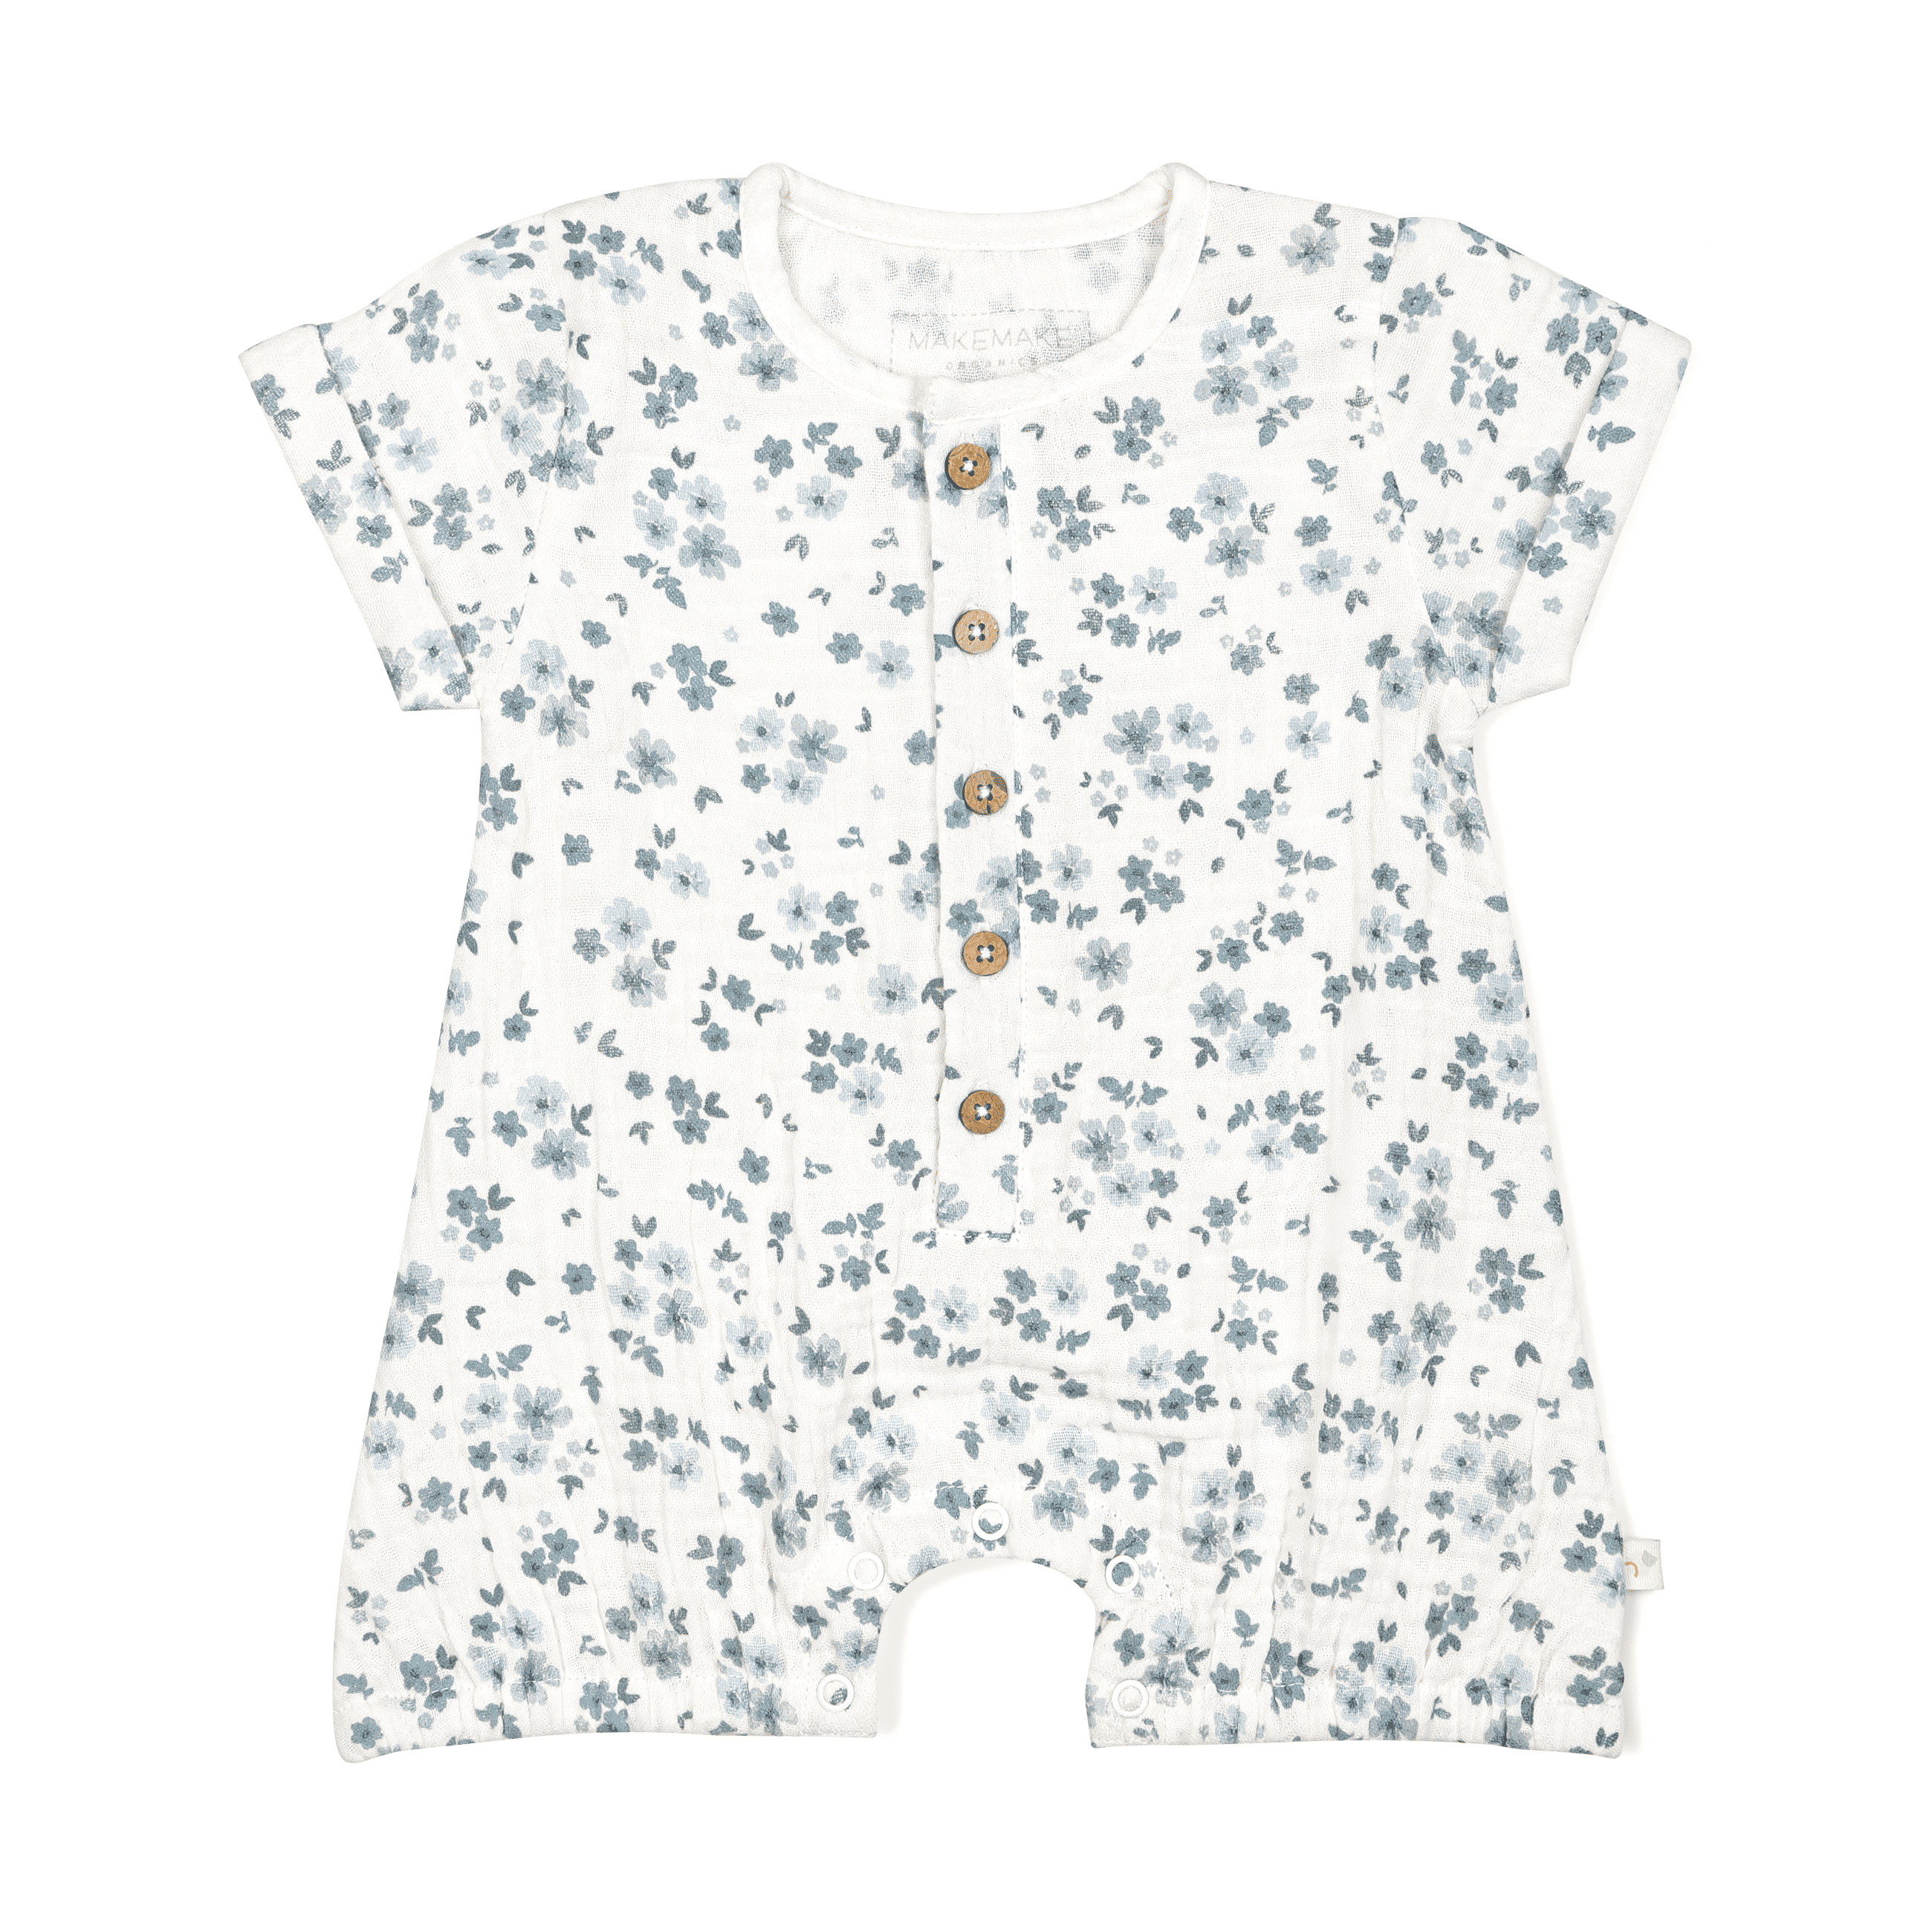 A white toddler romper with a delicate blue floral pattern and snap buttons on the front, displayed flat on a white background. 

Product Name: Organic Muslin Short Bubble Romper - Periwinkle 
Brand Name: Makemake Organics